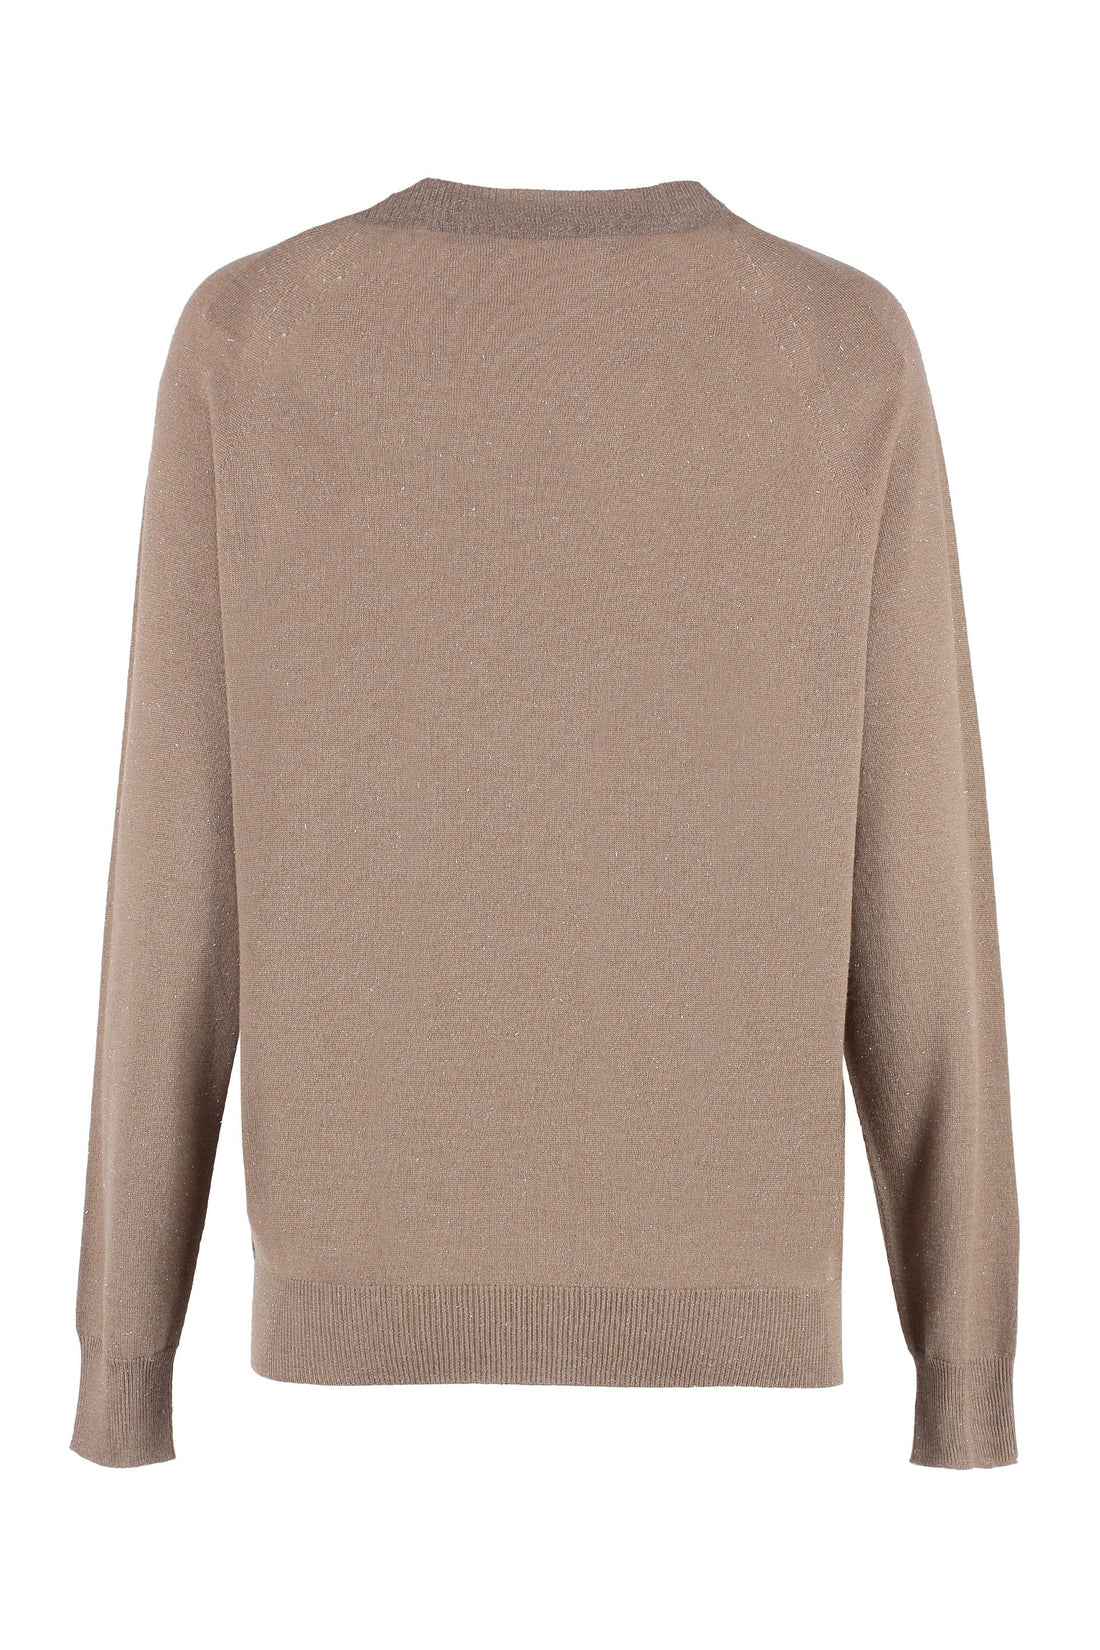 Peserico-OUTLET-SALE-Crew-neck wool sweater-ARCHIVIST